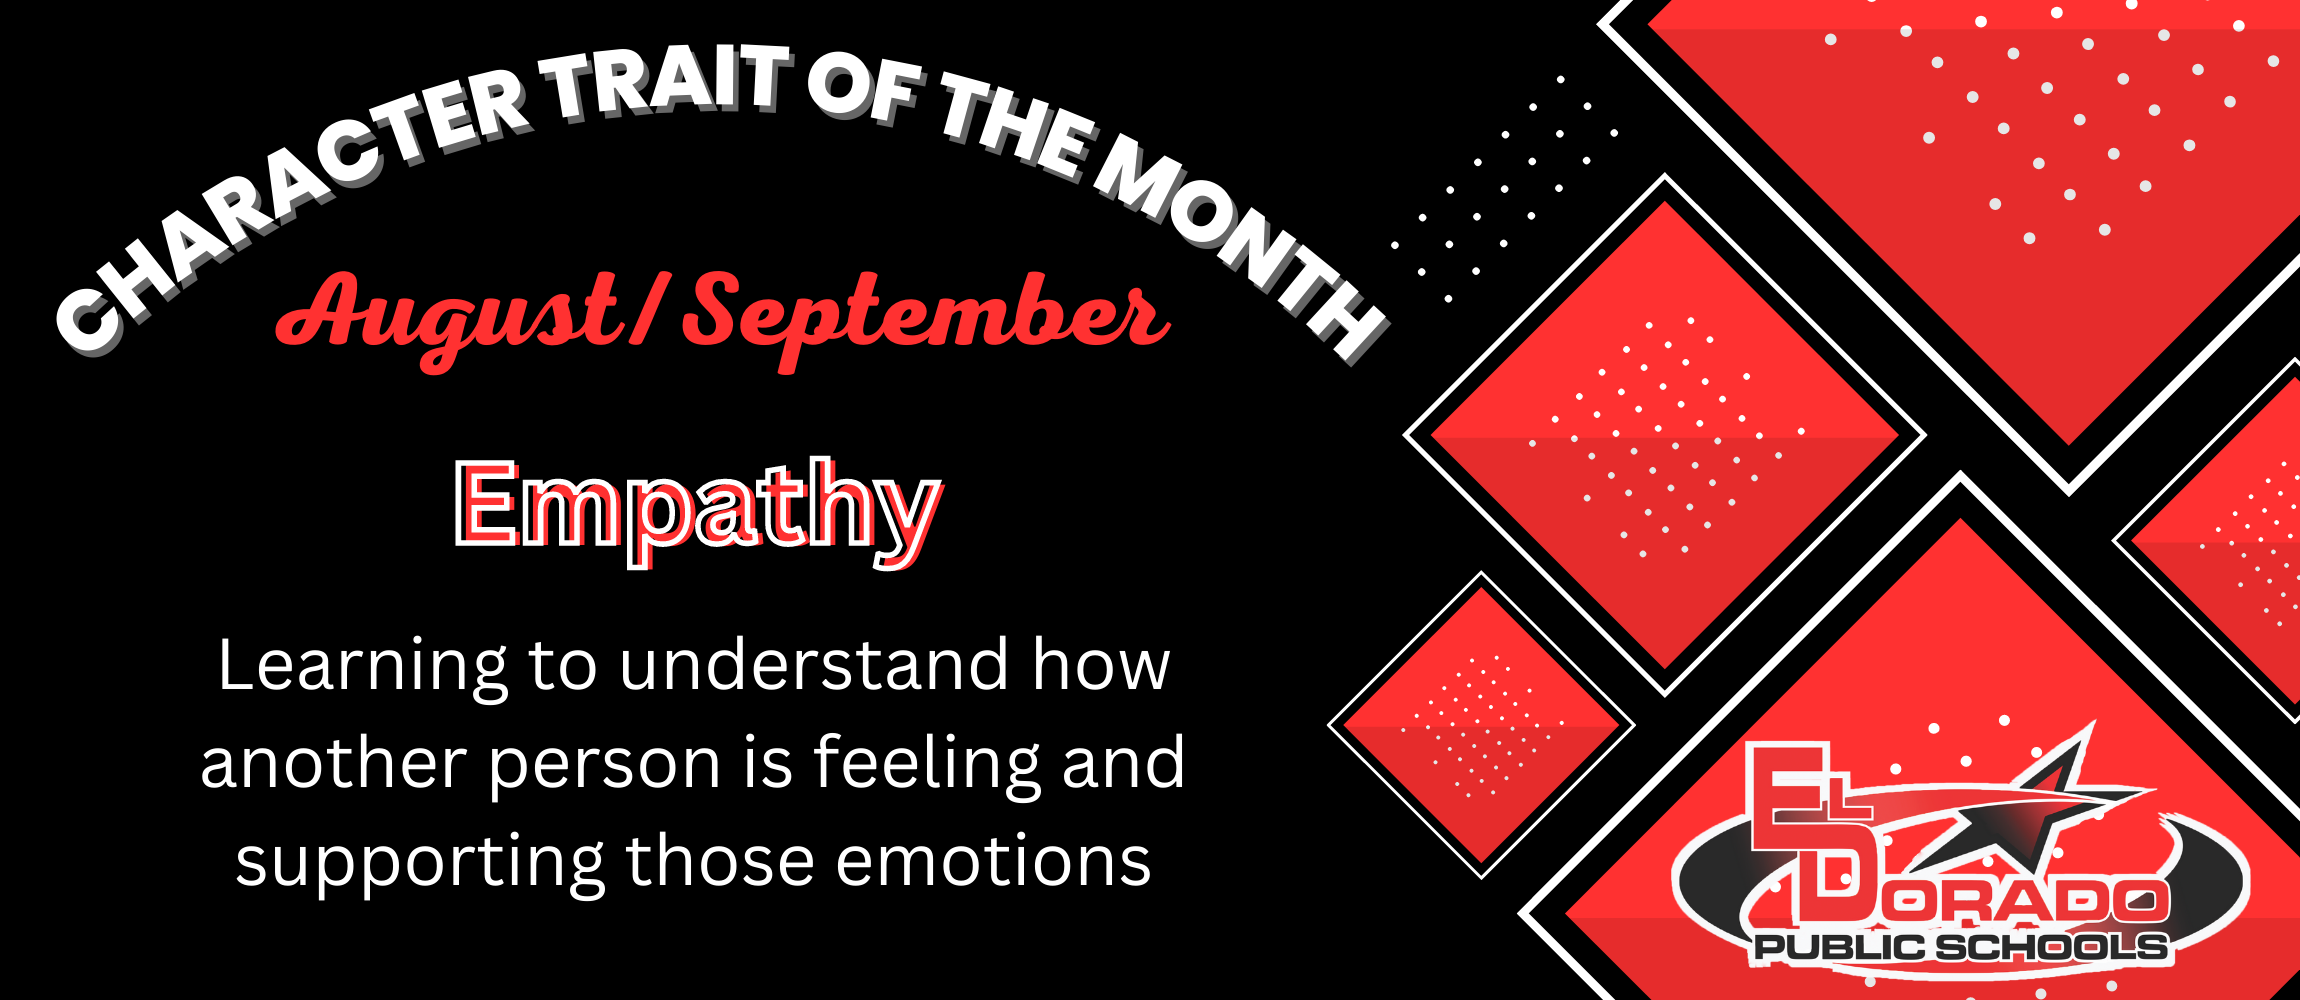 Character Trait of the Month for August/September - Empathy: Learning to understand how another person is feeling and supporting those emotions